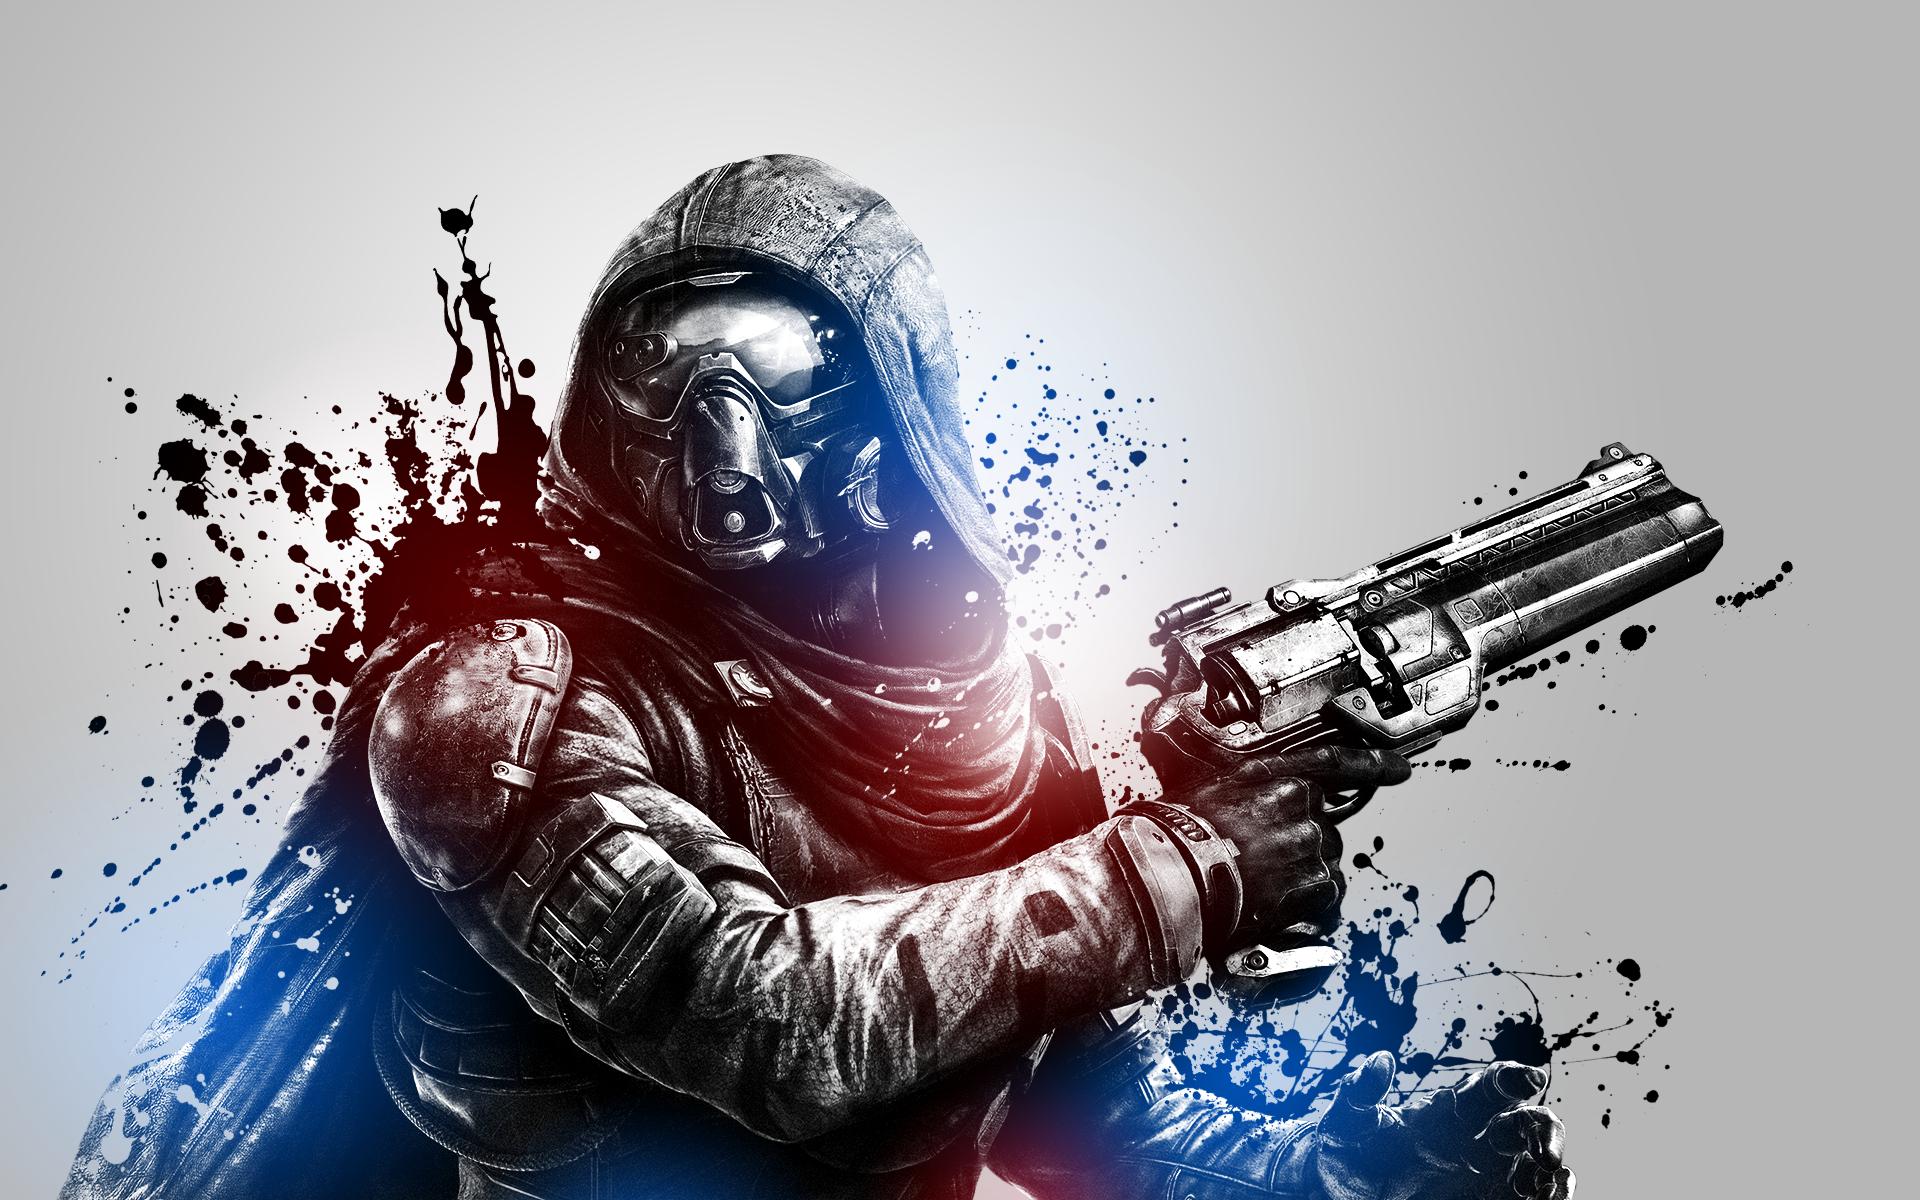  Awesome Destiny Wallpapers for your Computer Tablet or Phone